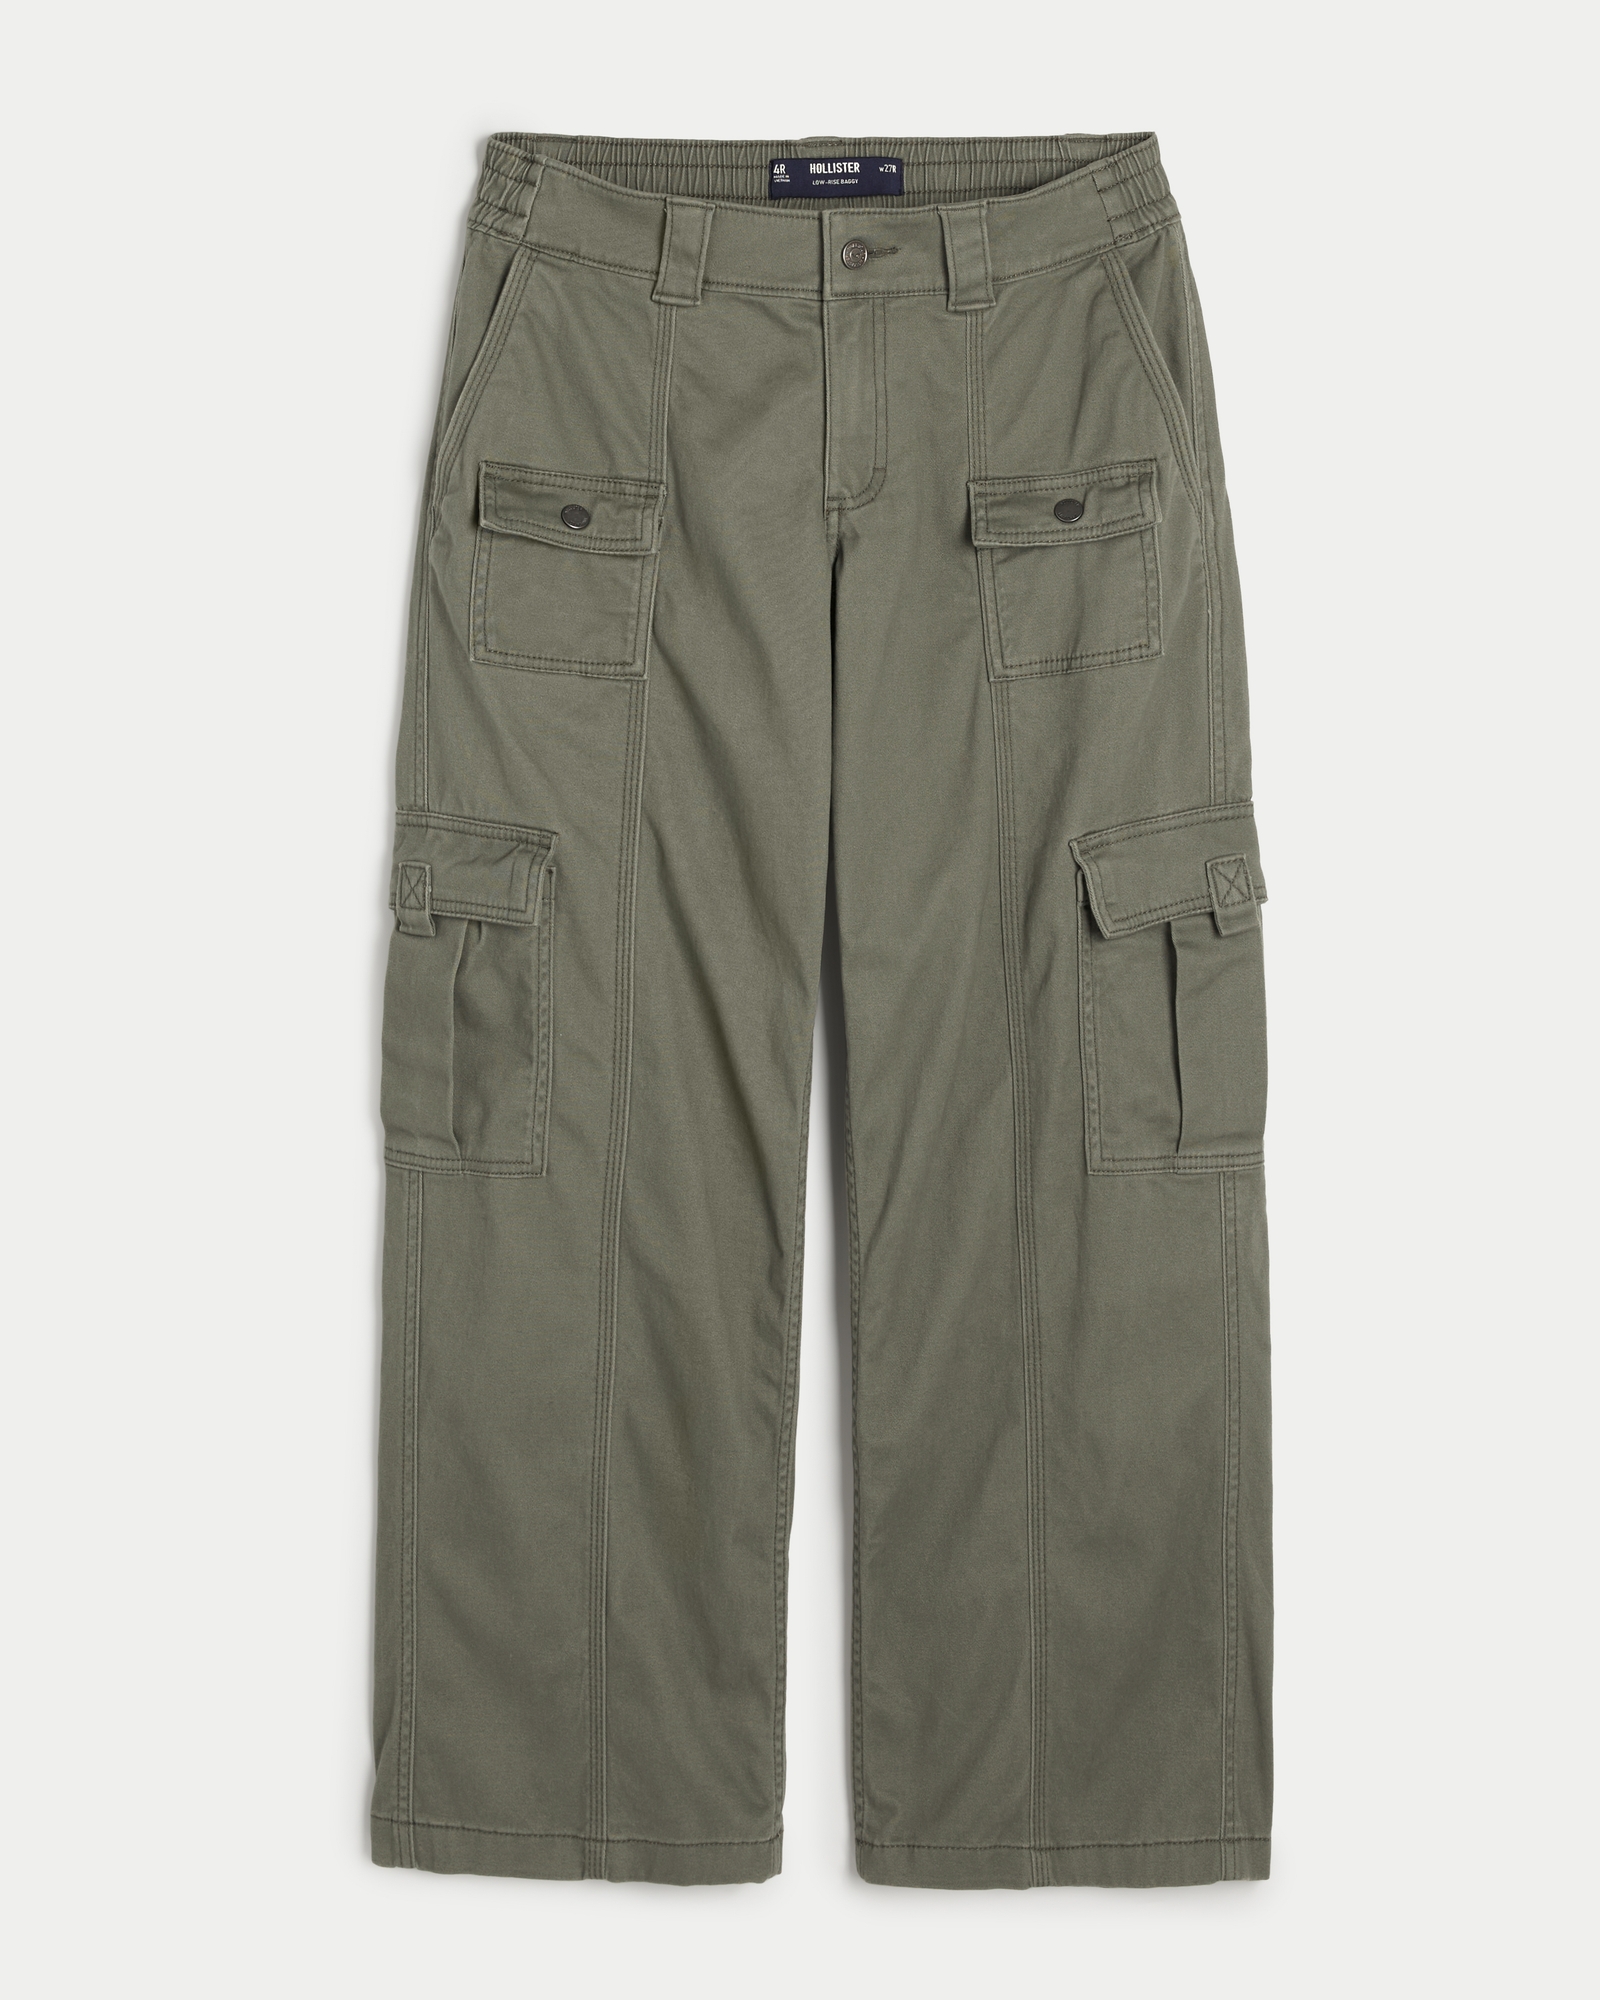 Green Flared Cargo Pants Camo Bellbottom Low Rise Trousers -  Norway